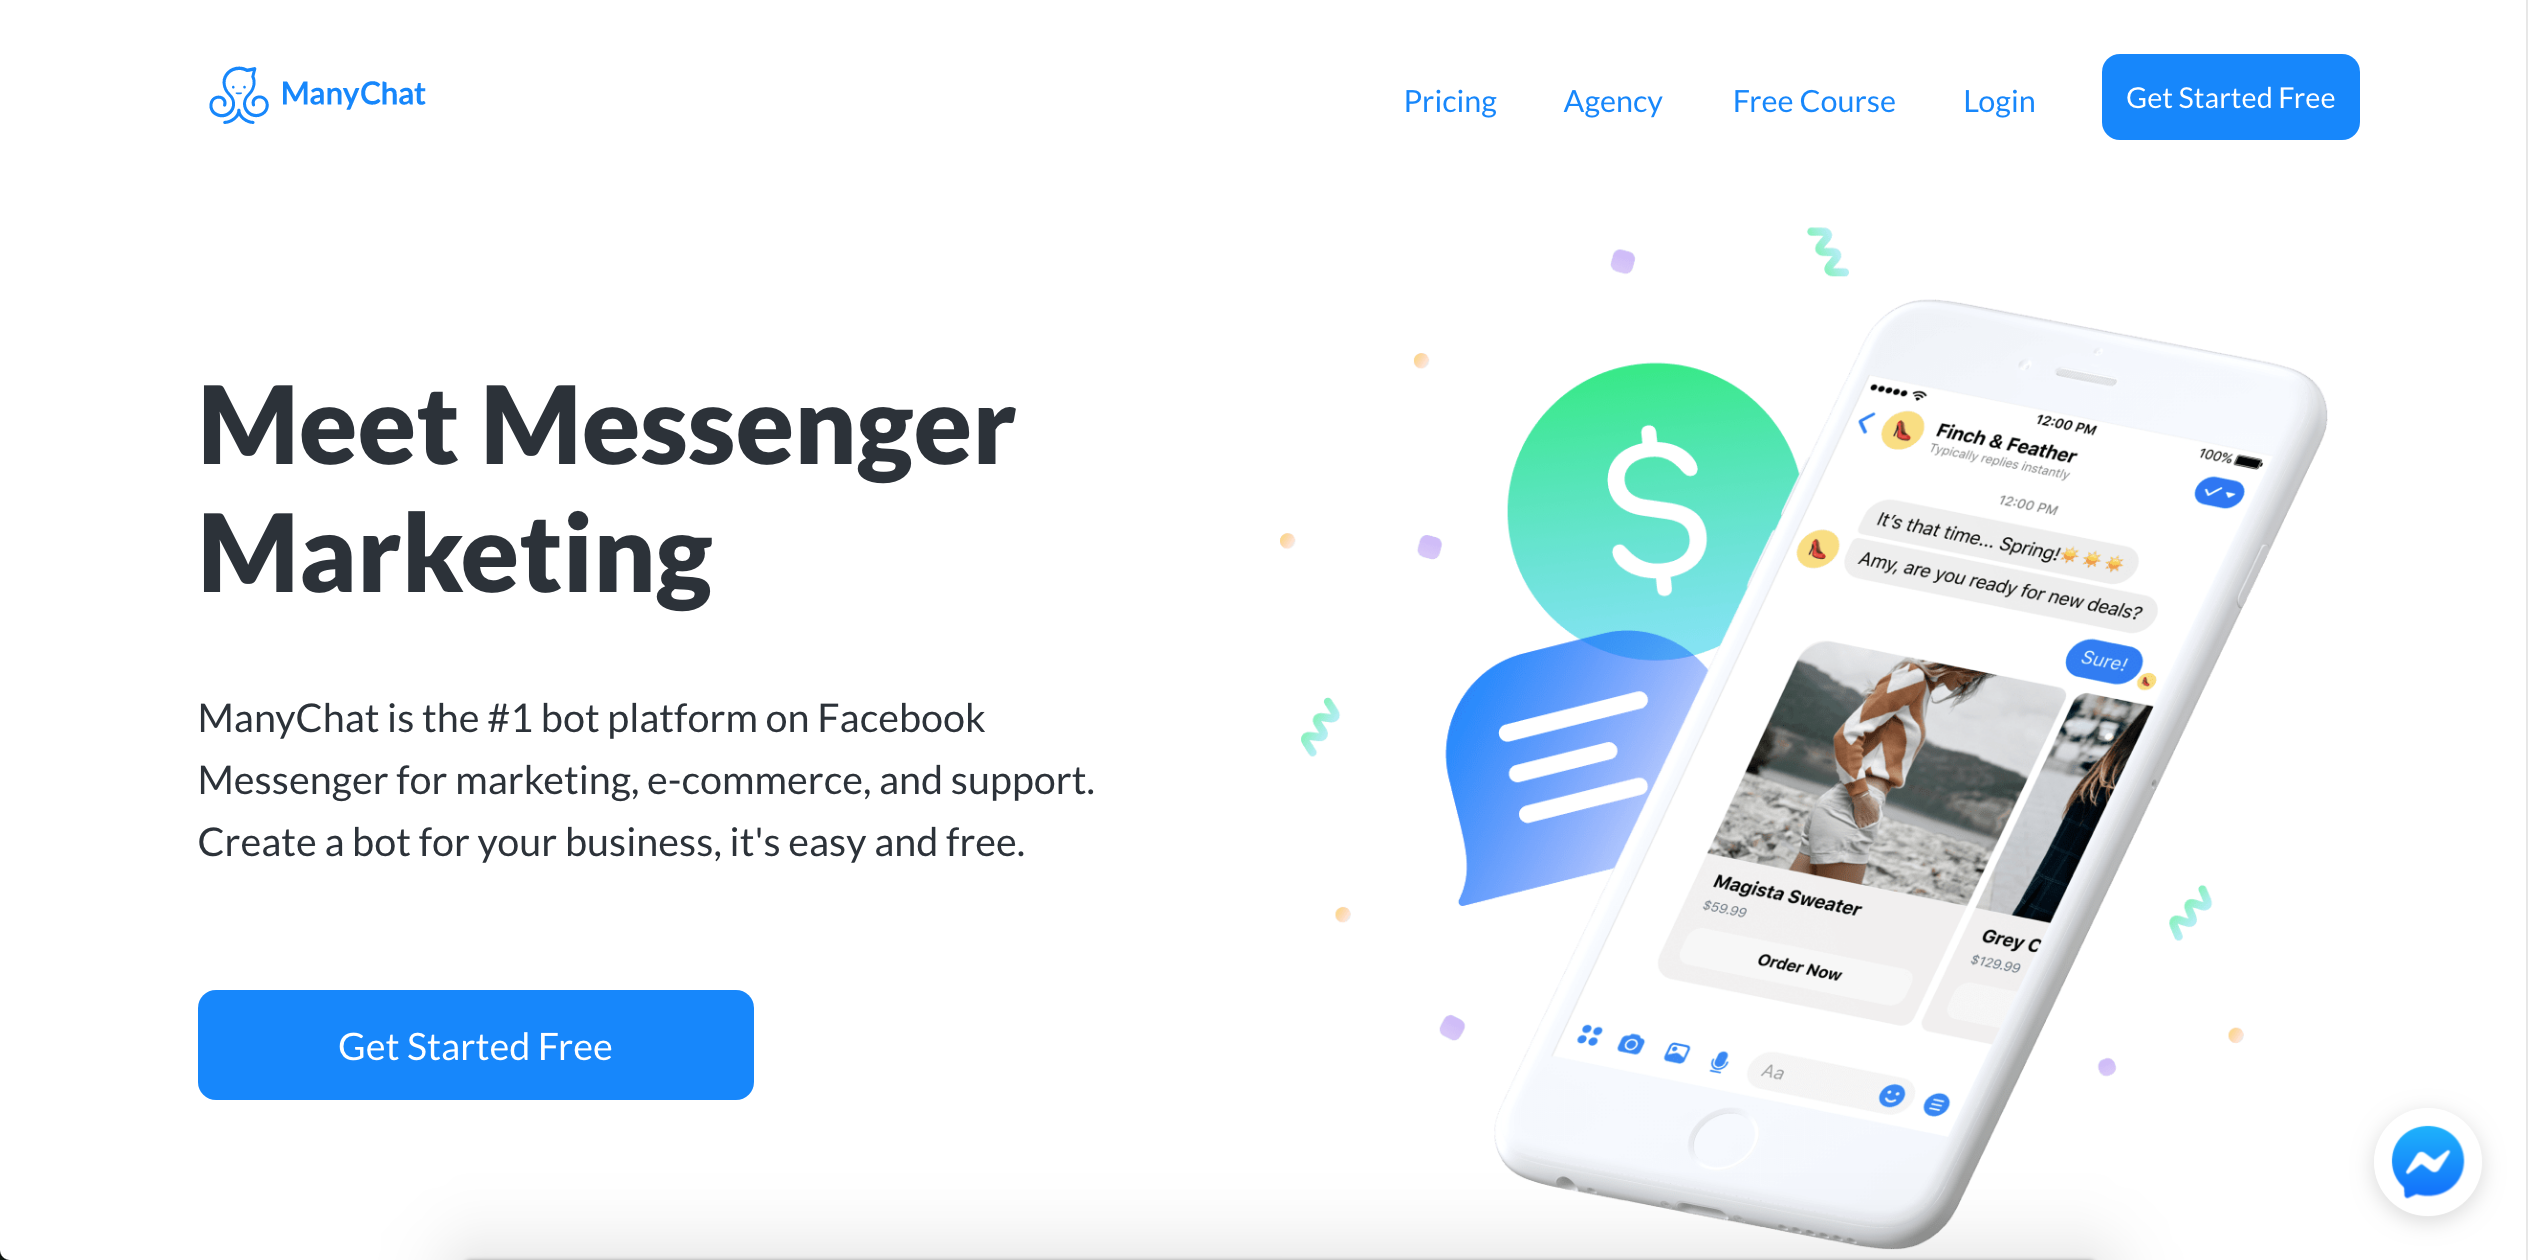 Step 2 to Make A Facebook Messenger bot: Create your free ManyChat account
